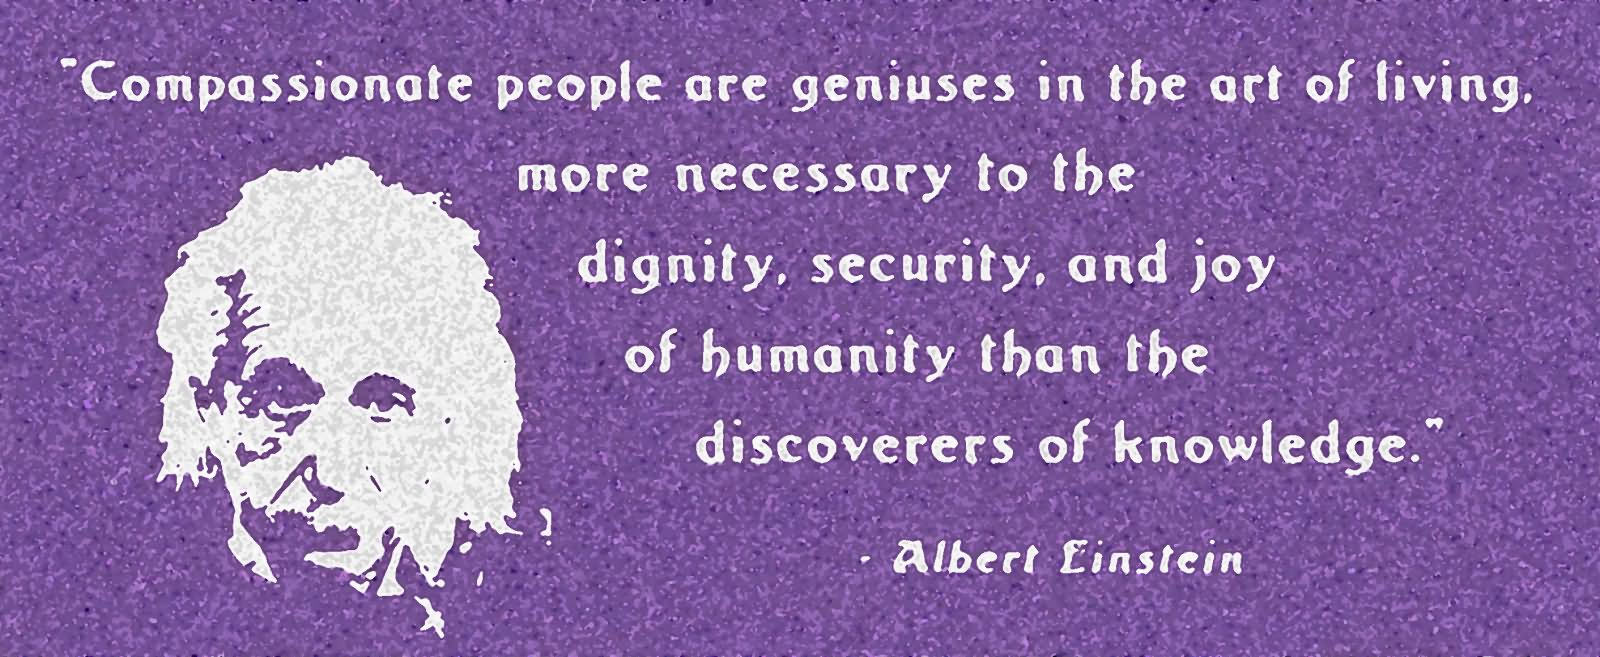 Compassionate people are geniuses in the art of living, more necessary to the dignity, security and joy of humanity than the discoverers of knowledge. - Albert Einstein